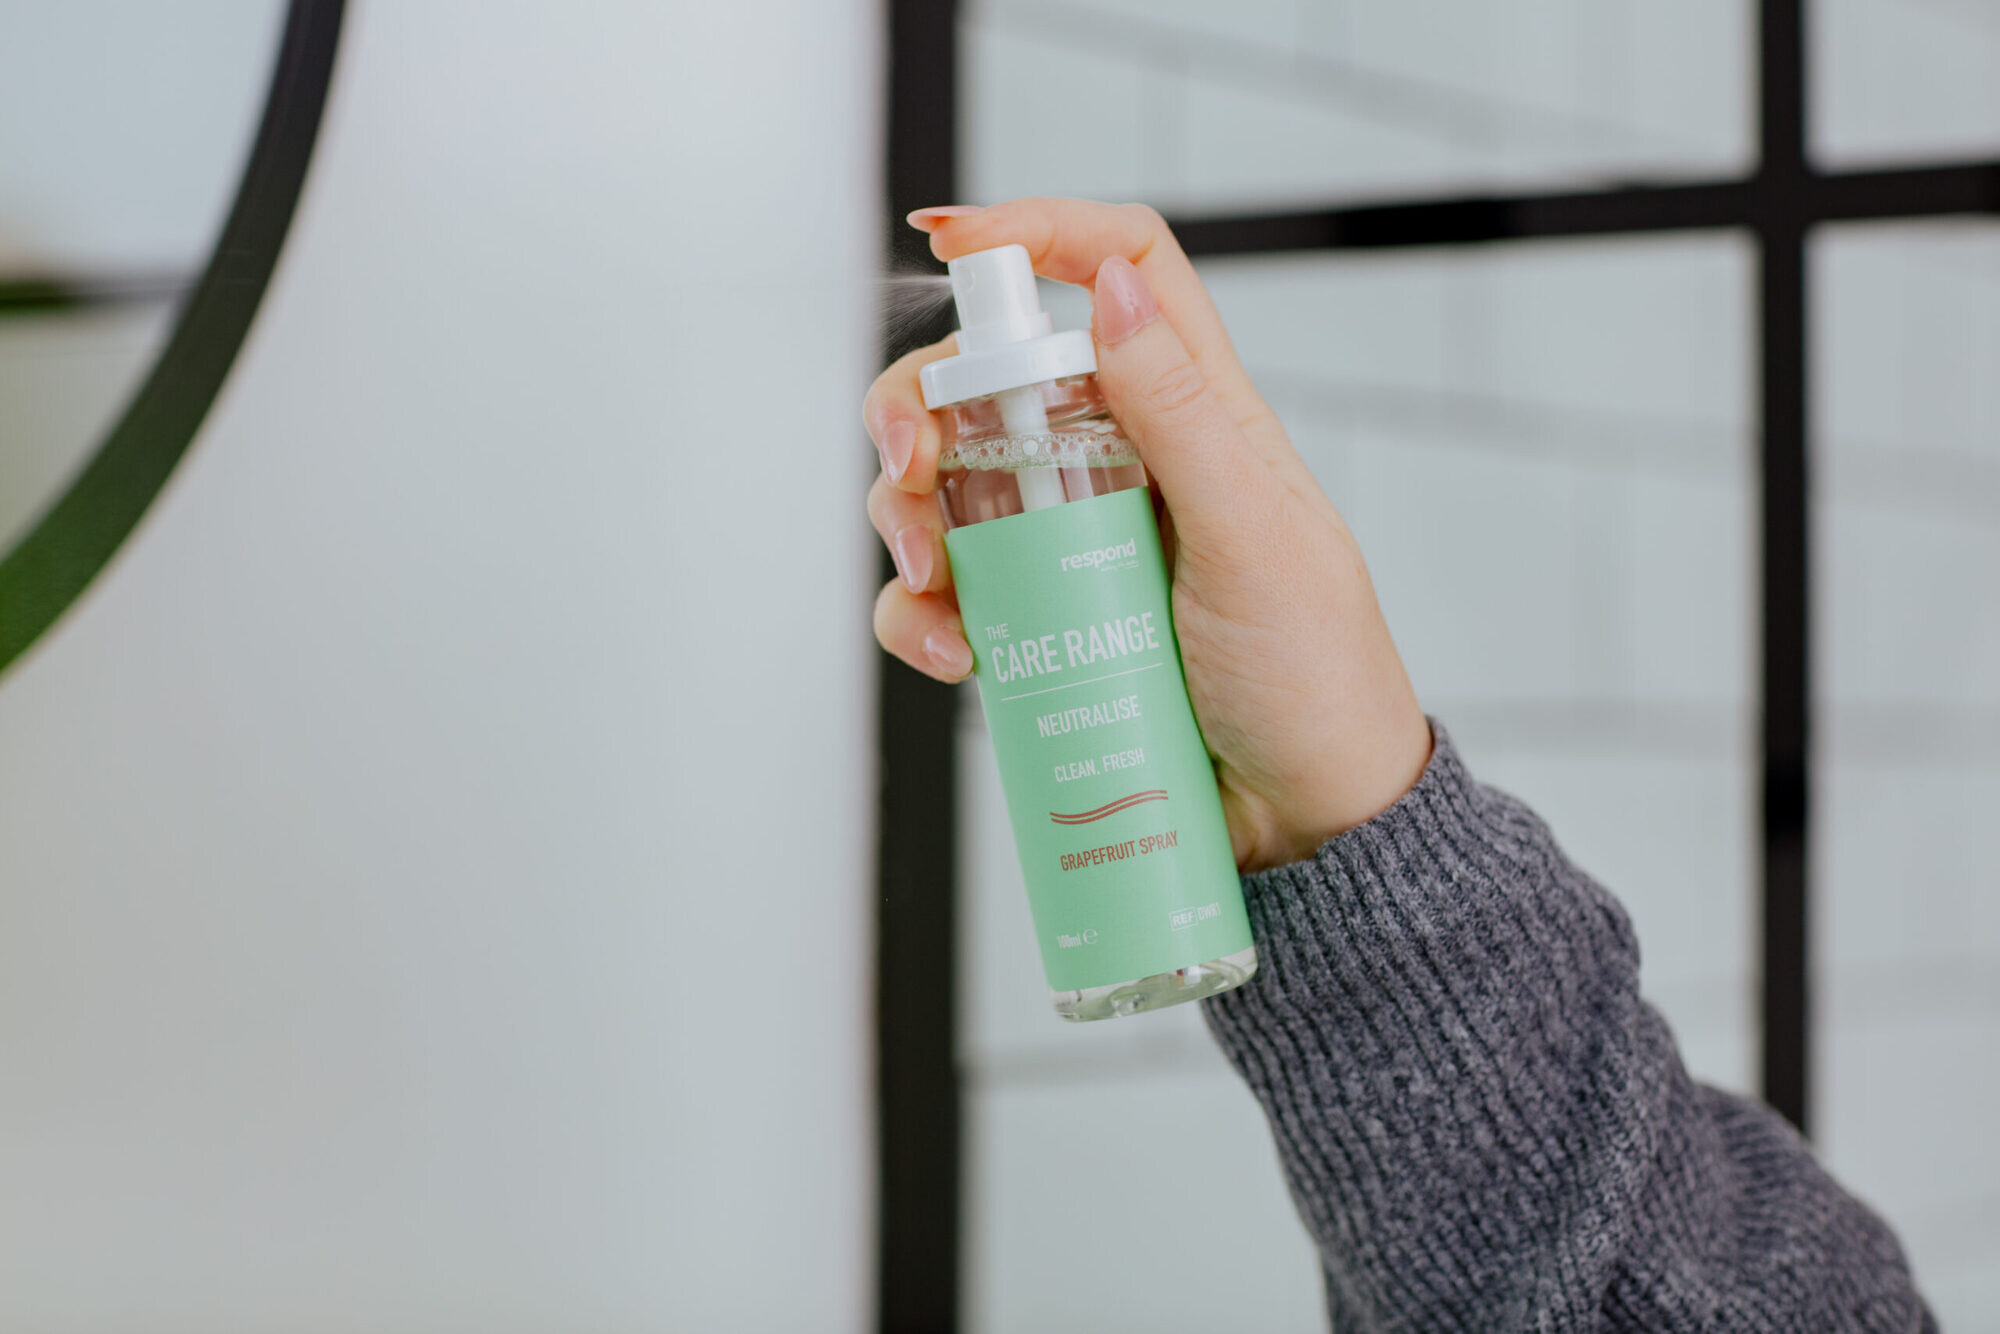 A user sprays our NEUTRALISE neutralising odour sprays in the scent grapefruit into the bathroom.